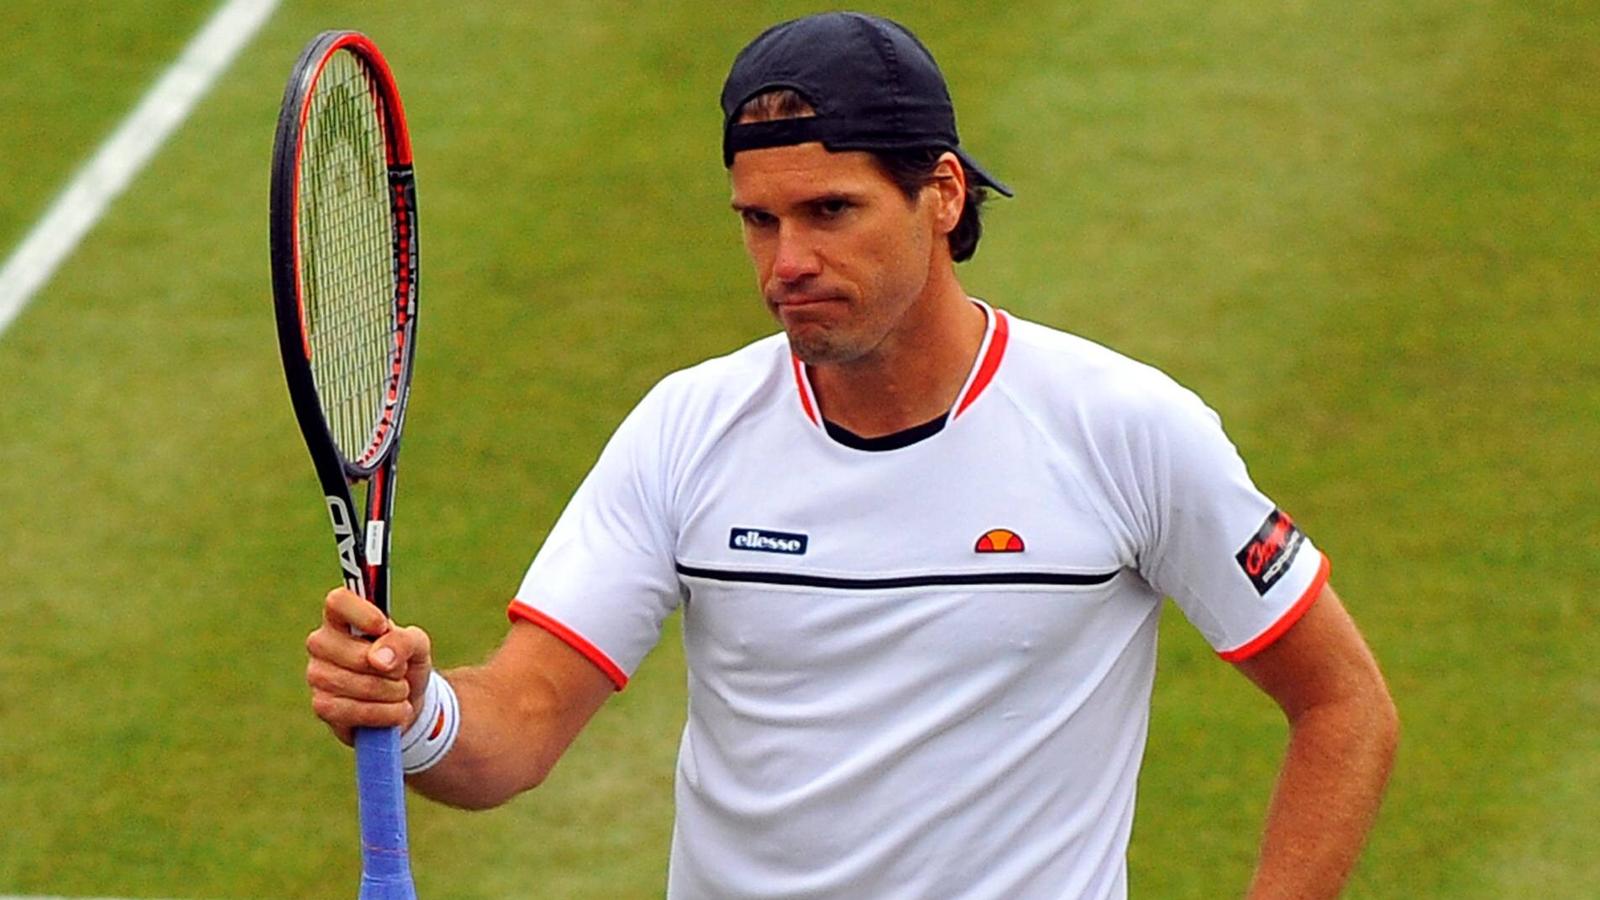 Tommy Haas Becomes Oldest Man to Win at Wimbledon in 24 Years 